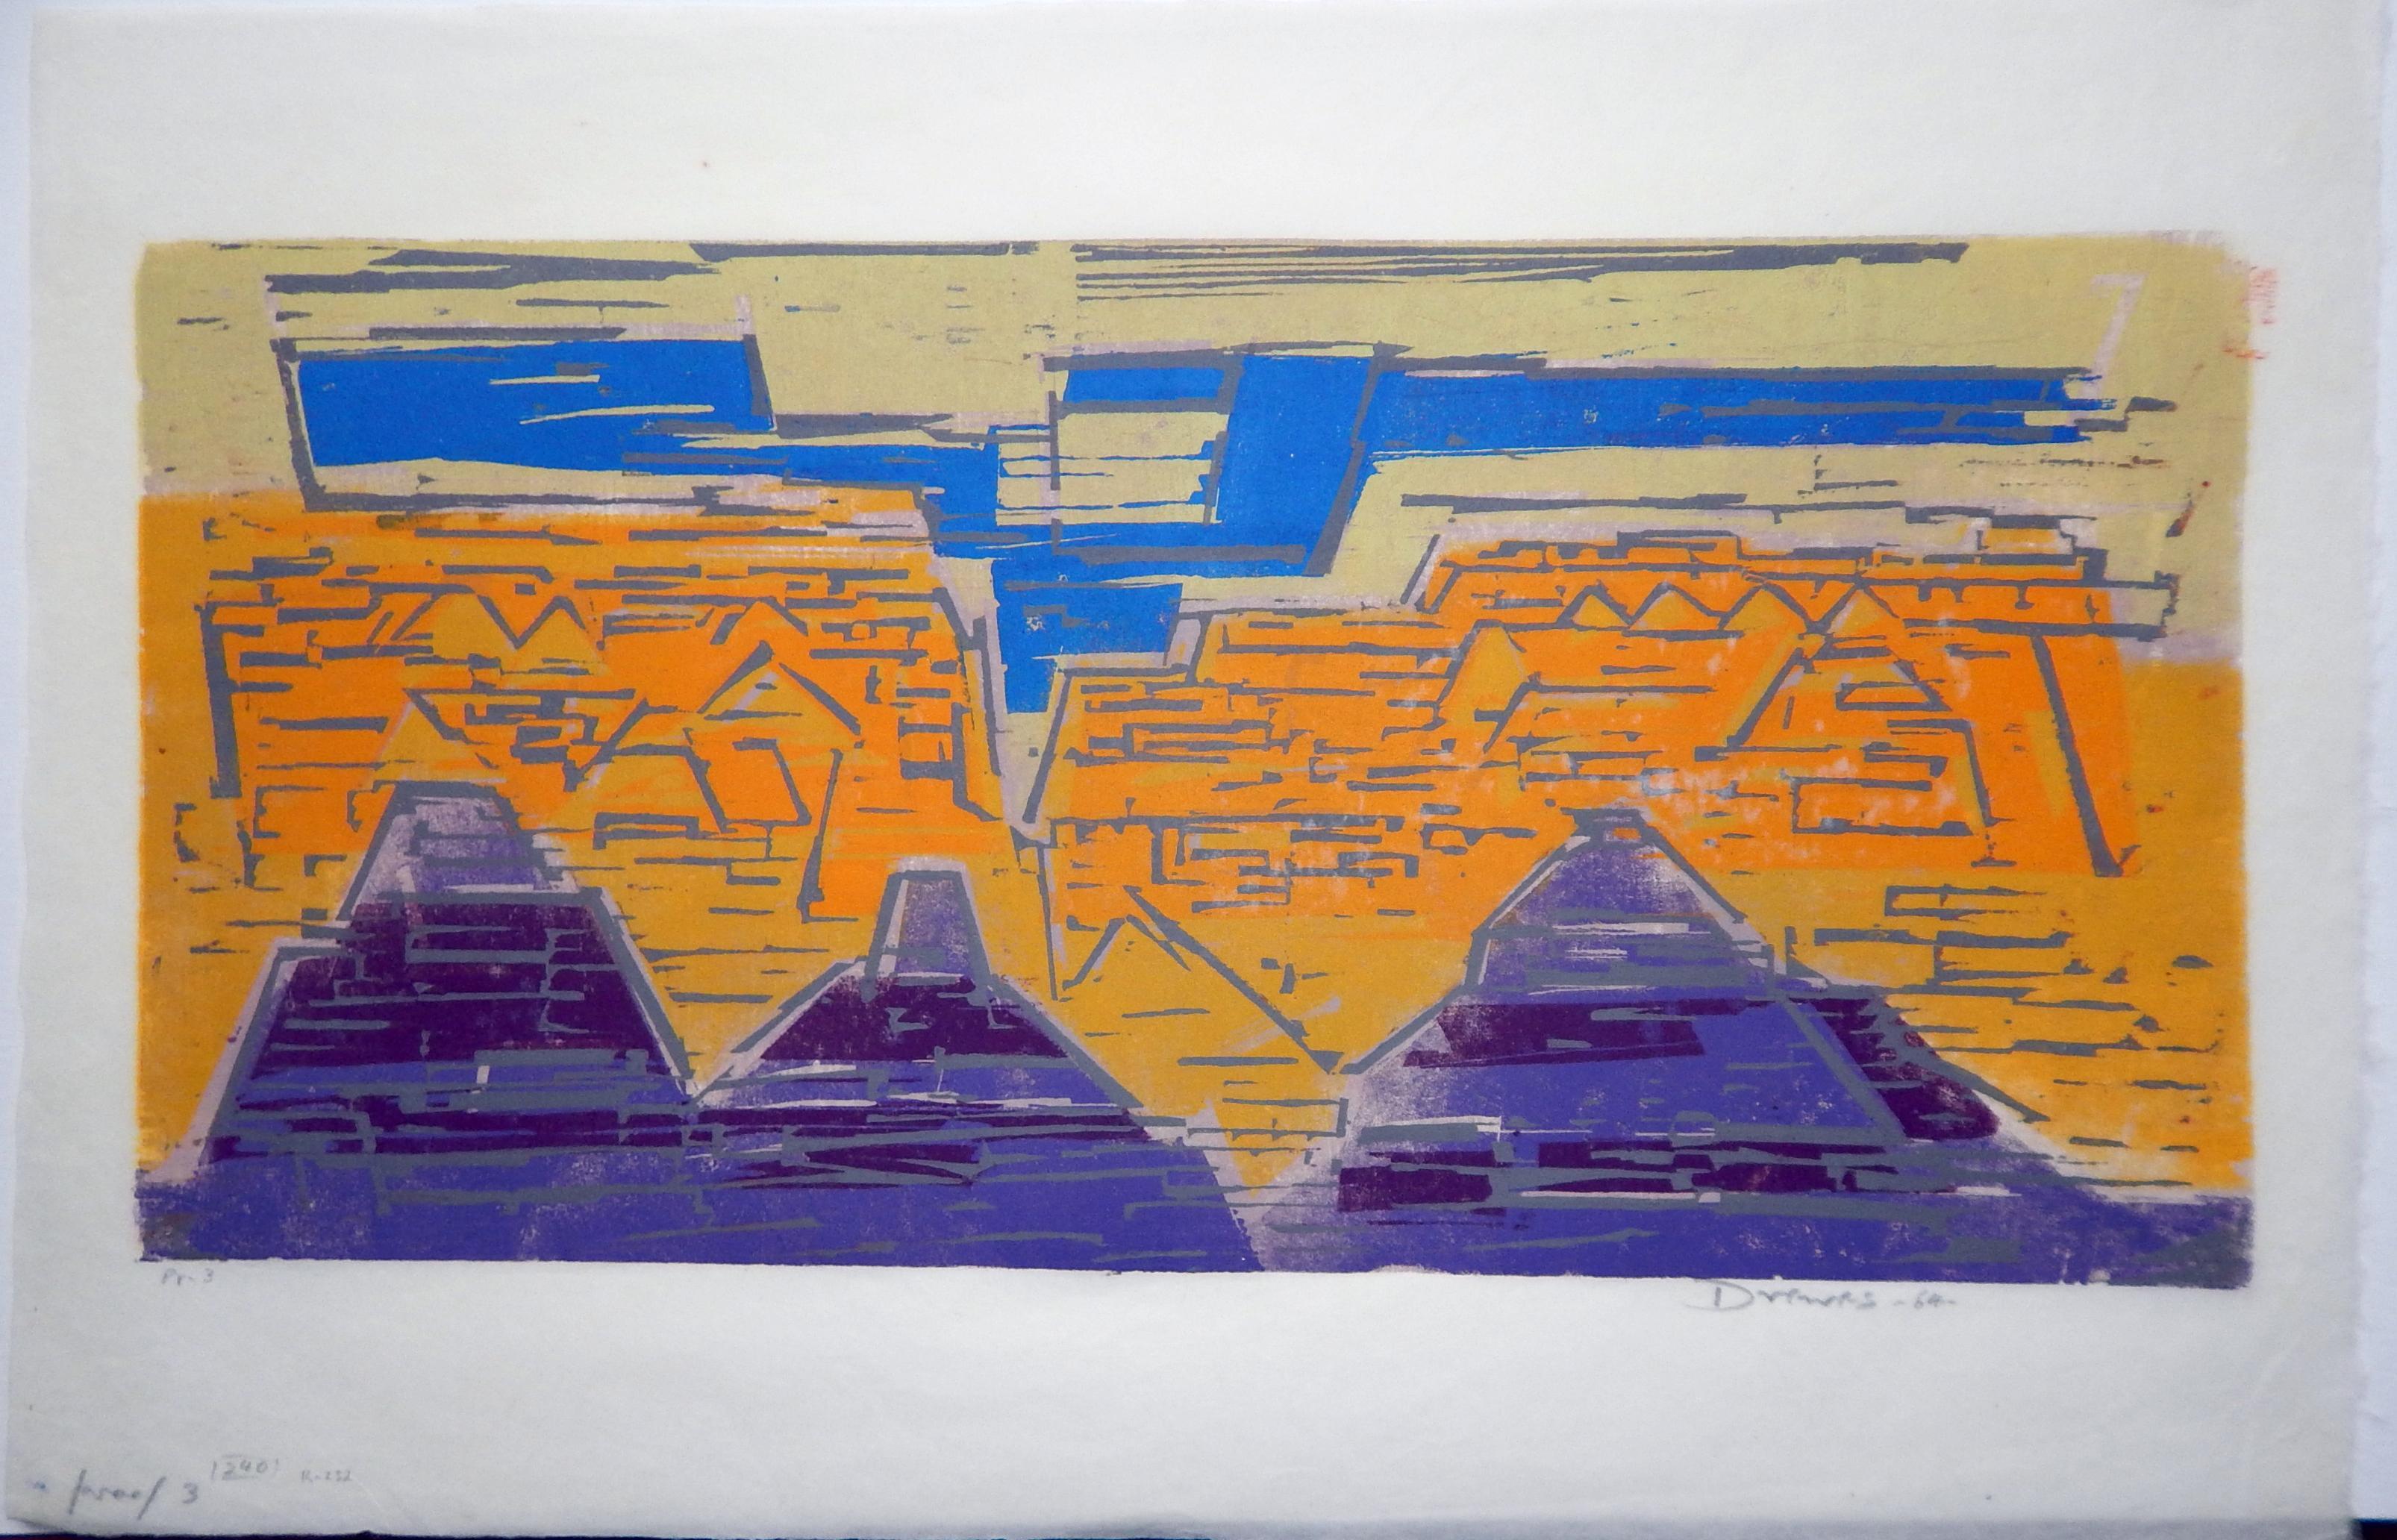 Original color woodblock print by Werner Drewes.
In excellent condition. Unframed.
Image measures: 11 1/8 x 22 7/8 inches.
Pencil signed and dated lower right.
Numbered in pencil lower left: Proof 3
R-232.

Werner Drewes (1899-1985)
Werner